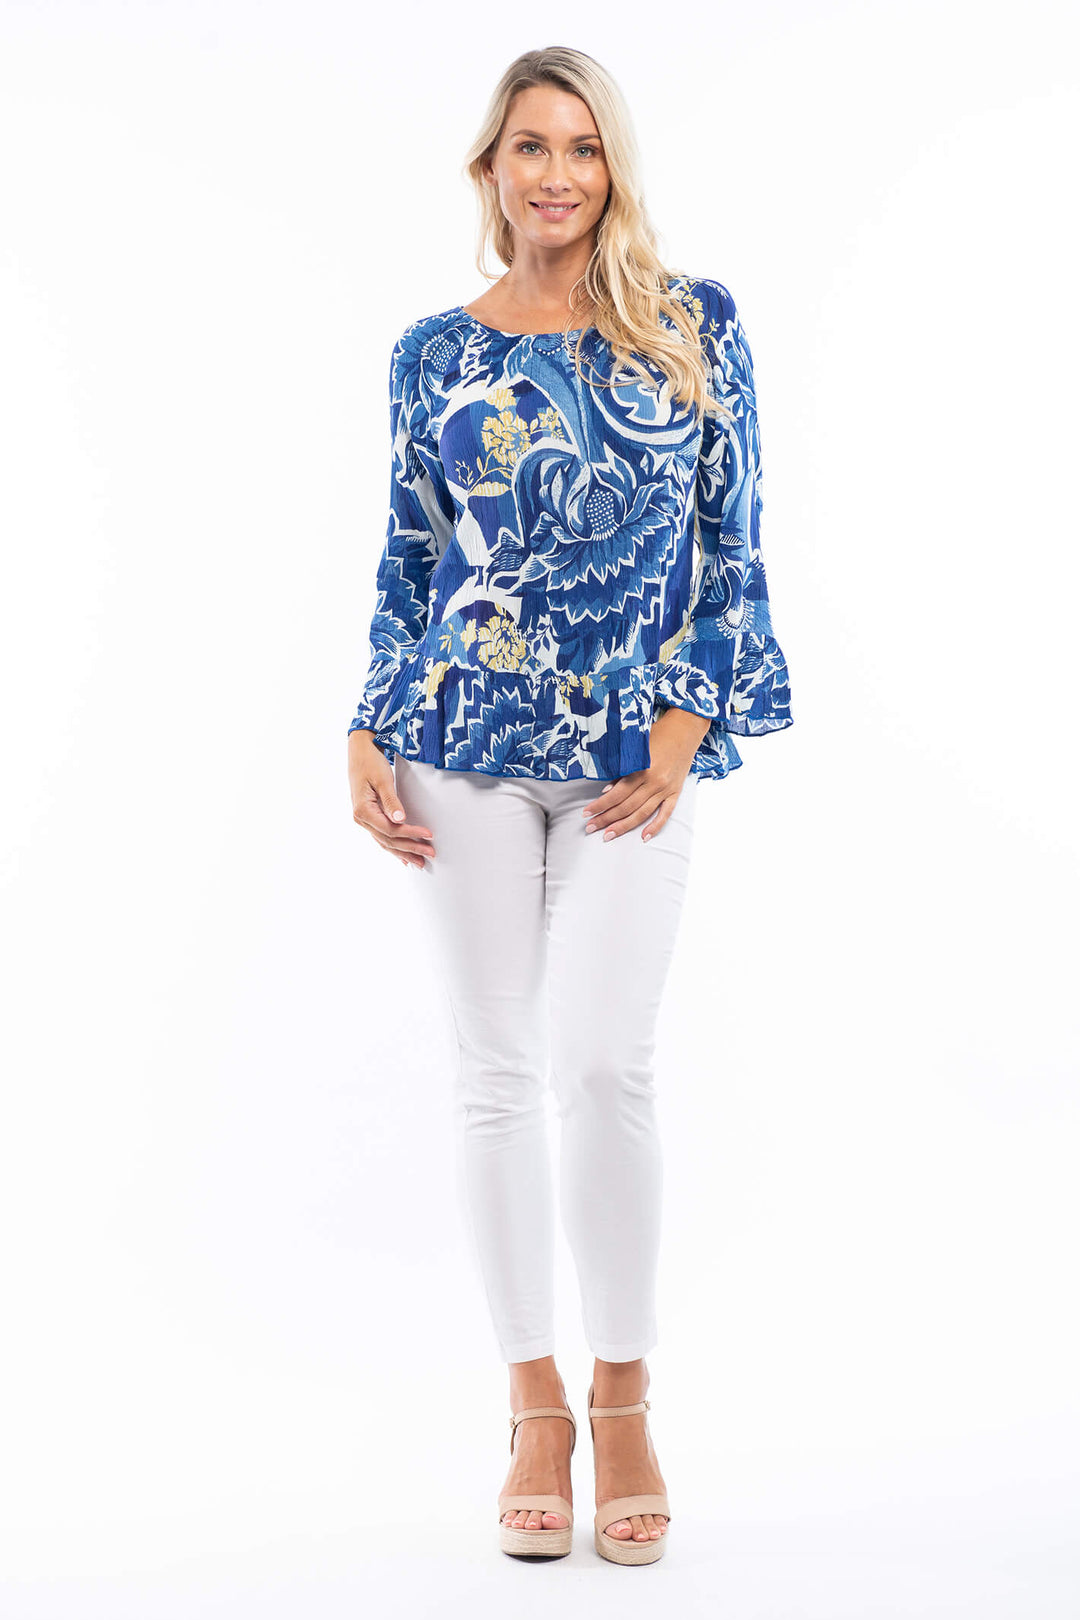 Orientique 82134 Blue Palace Messina Frill Sleeve Top - Shirley Allum Boutique